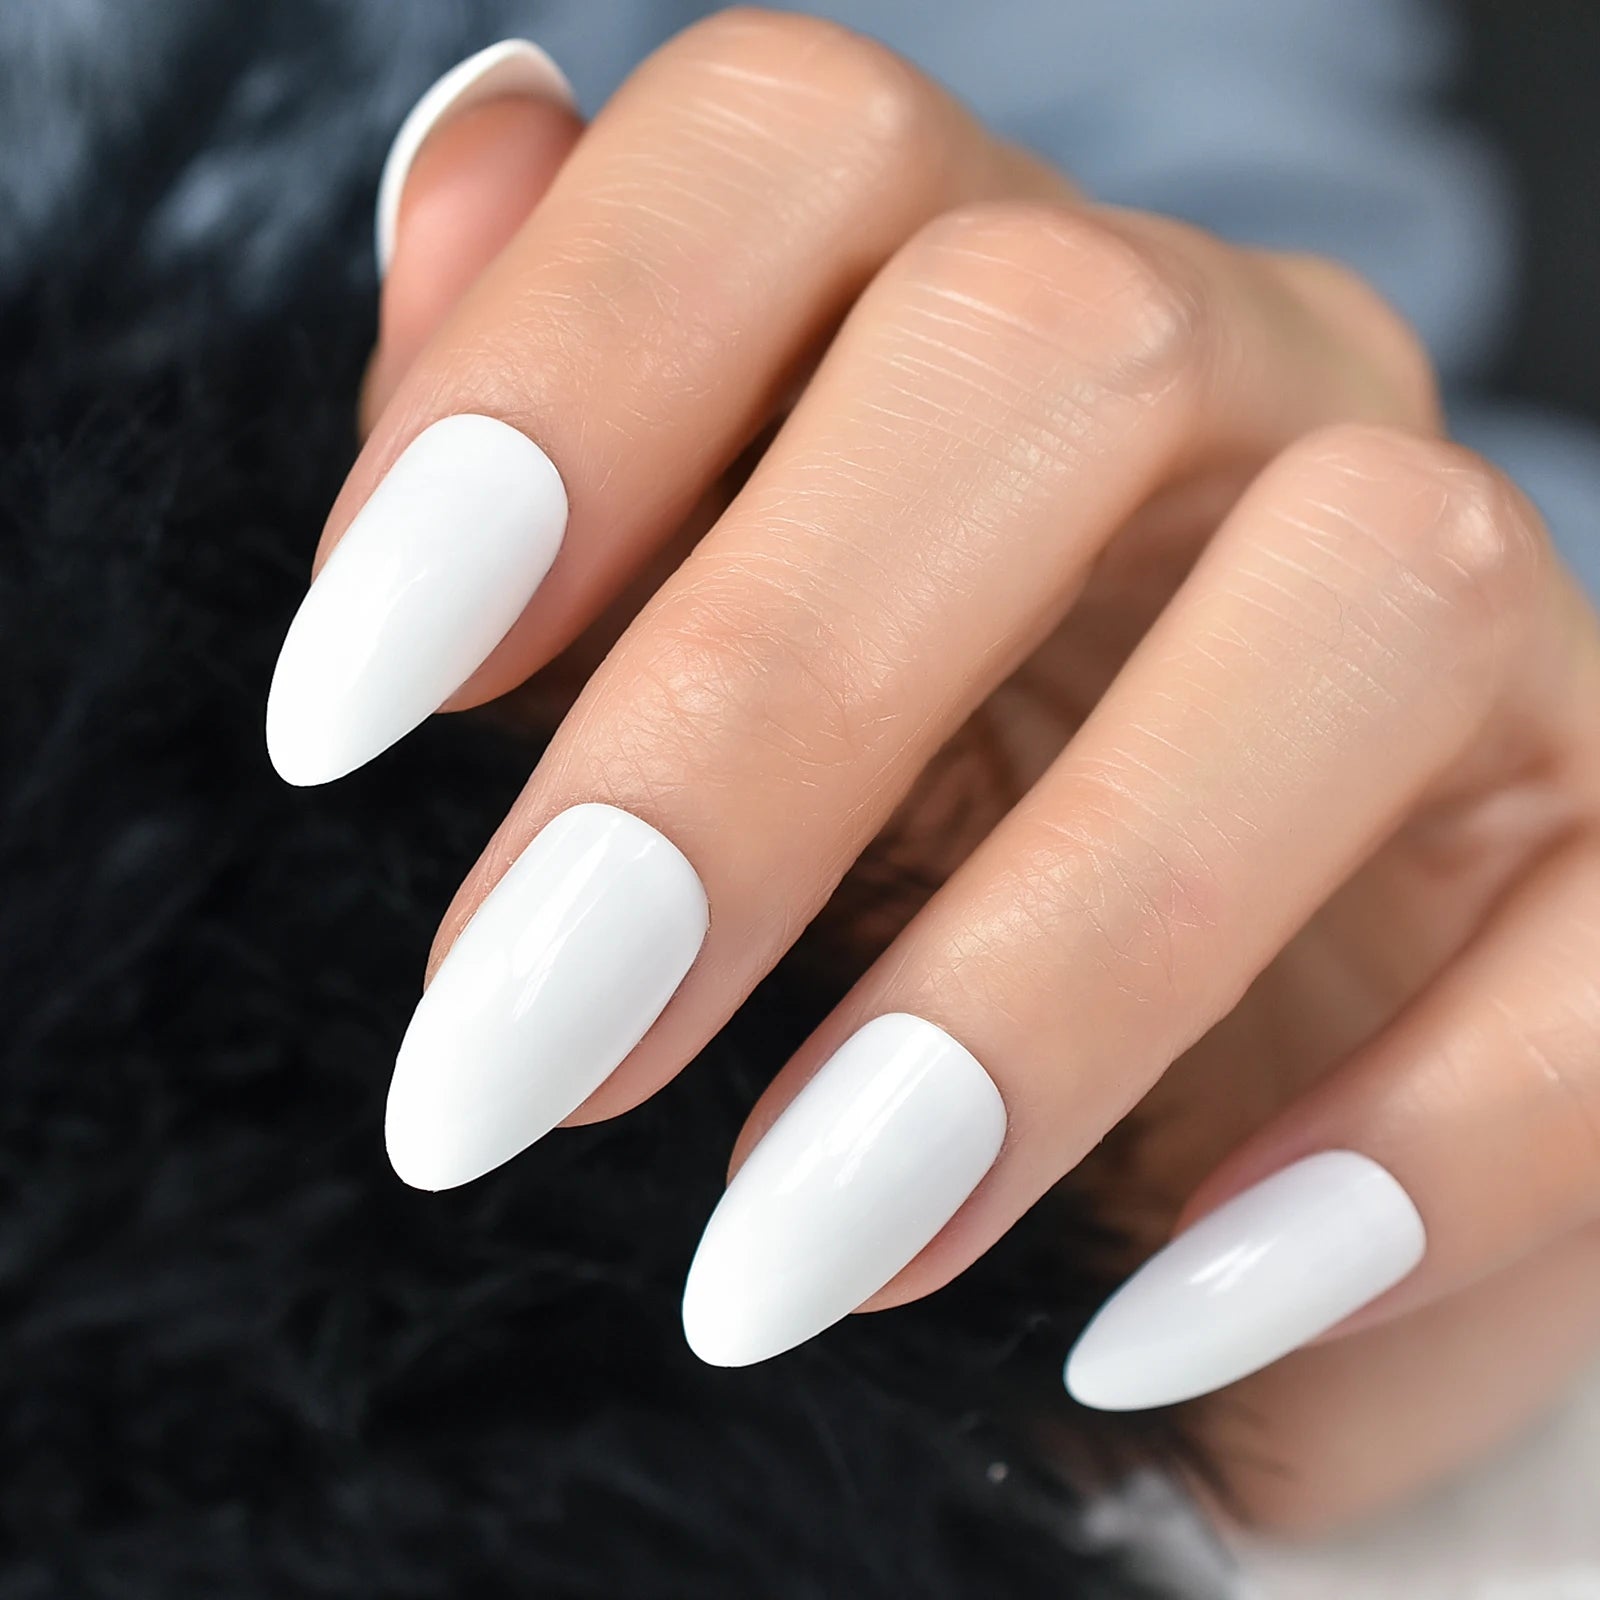 Glossy White Press on Nails  Ballerina Medium Almond False Nails Solid Color Matte Form For Fake Nail